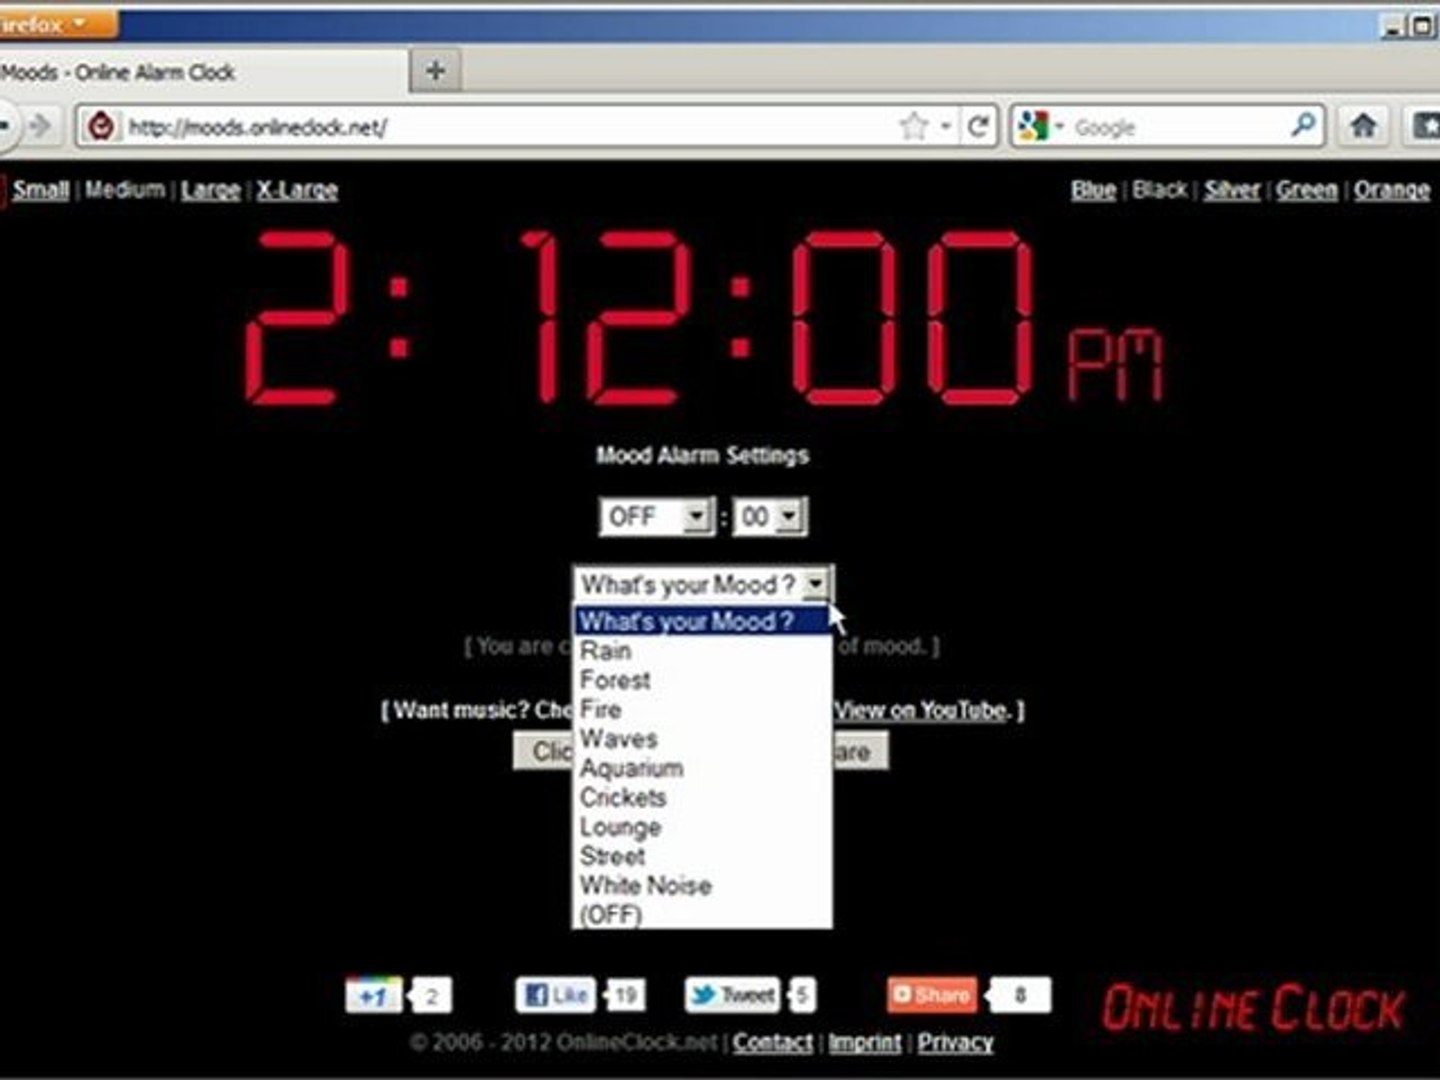 Ambient Sounds Alarm Clock - OnlineClock.net - video Dailymotion